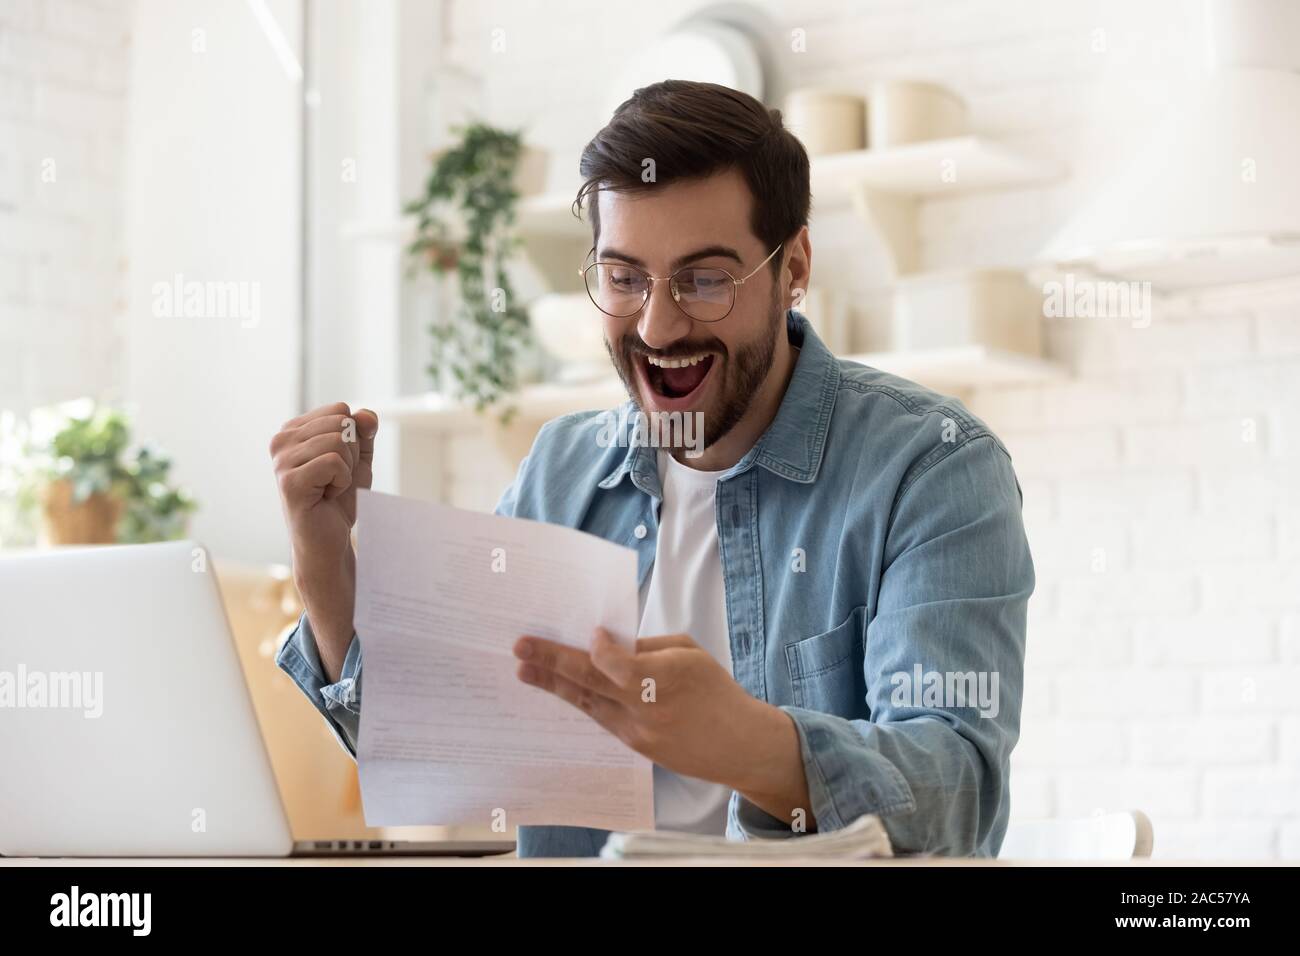 Excited man reading postal mail letter overjoyed by good news Stock Photo